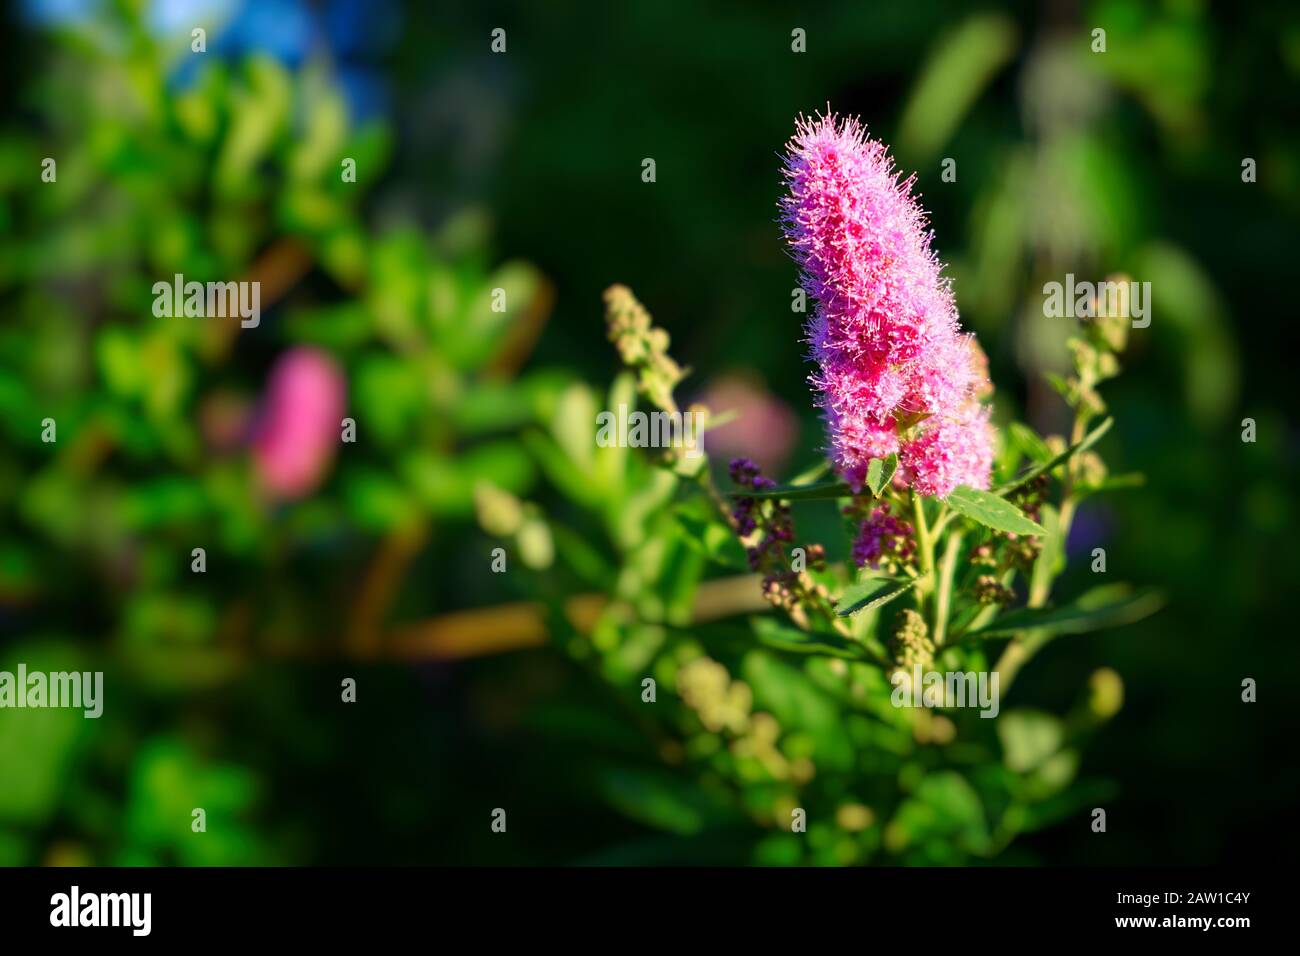 Beautiful ornamental pink inflorescence spike in flower on a green shrub in a garden close up in sunlight with copy space Stock Photo